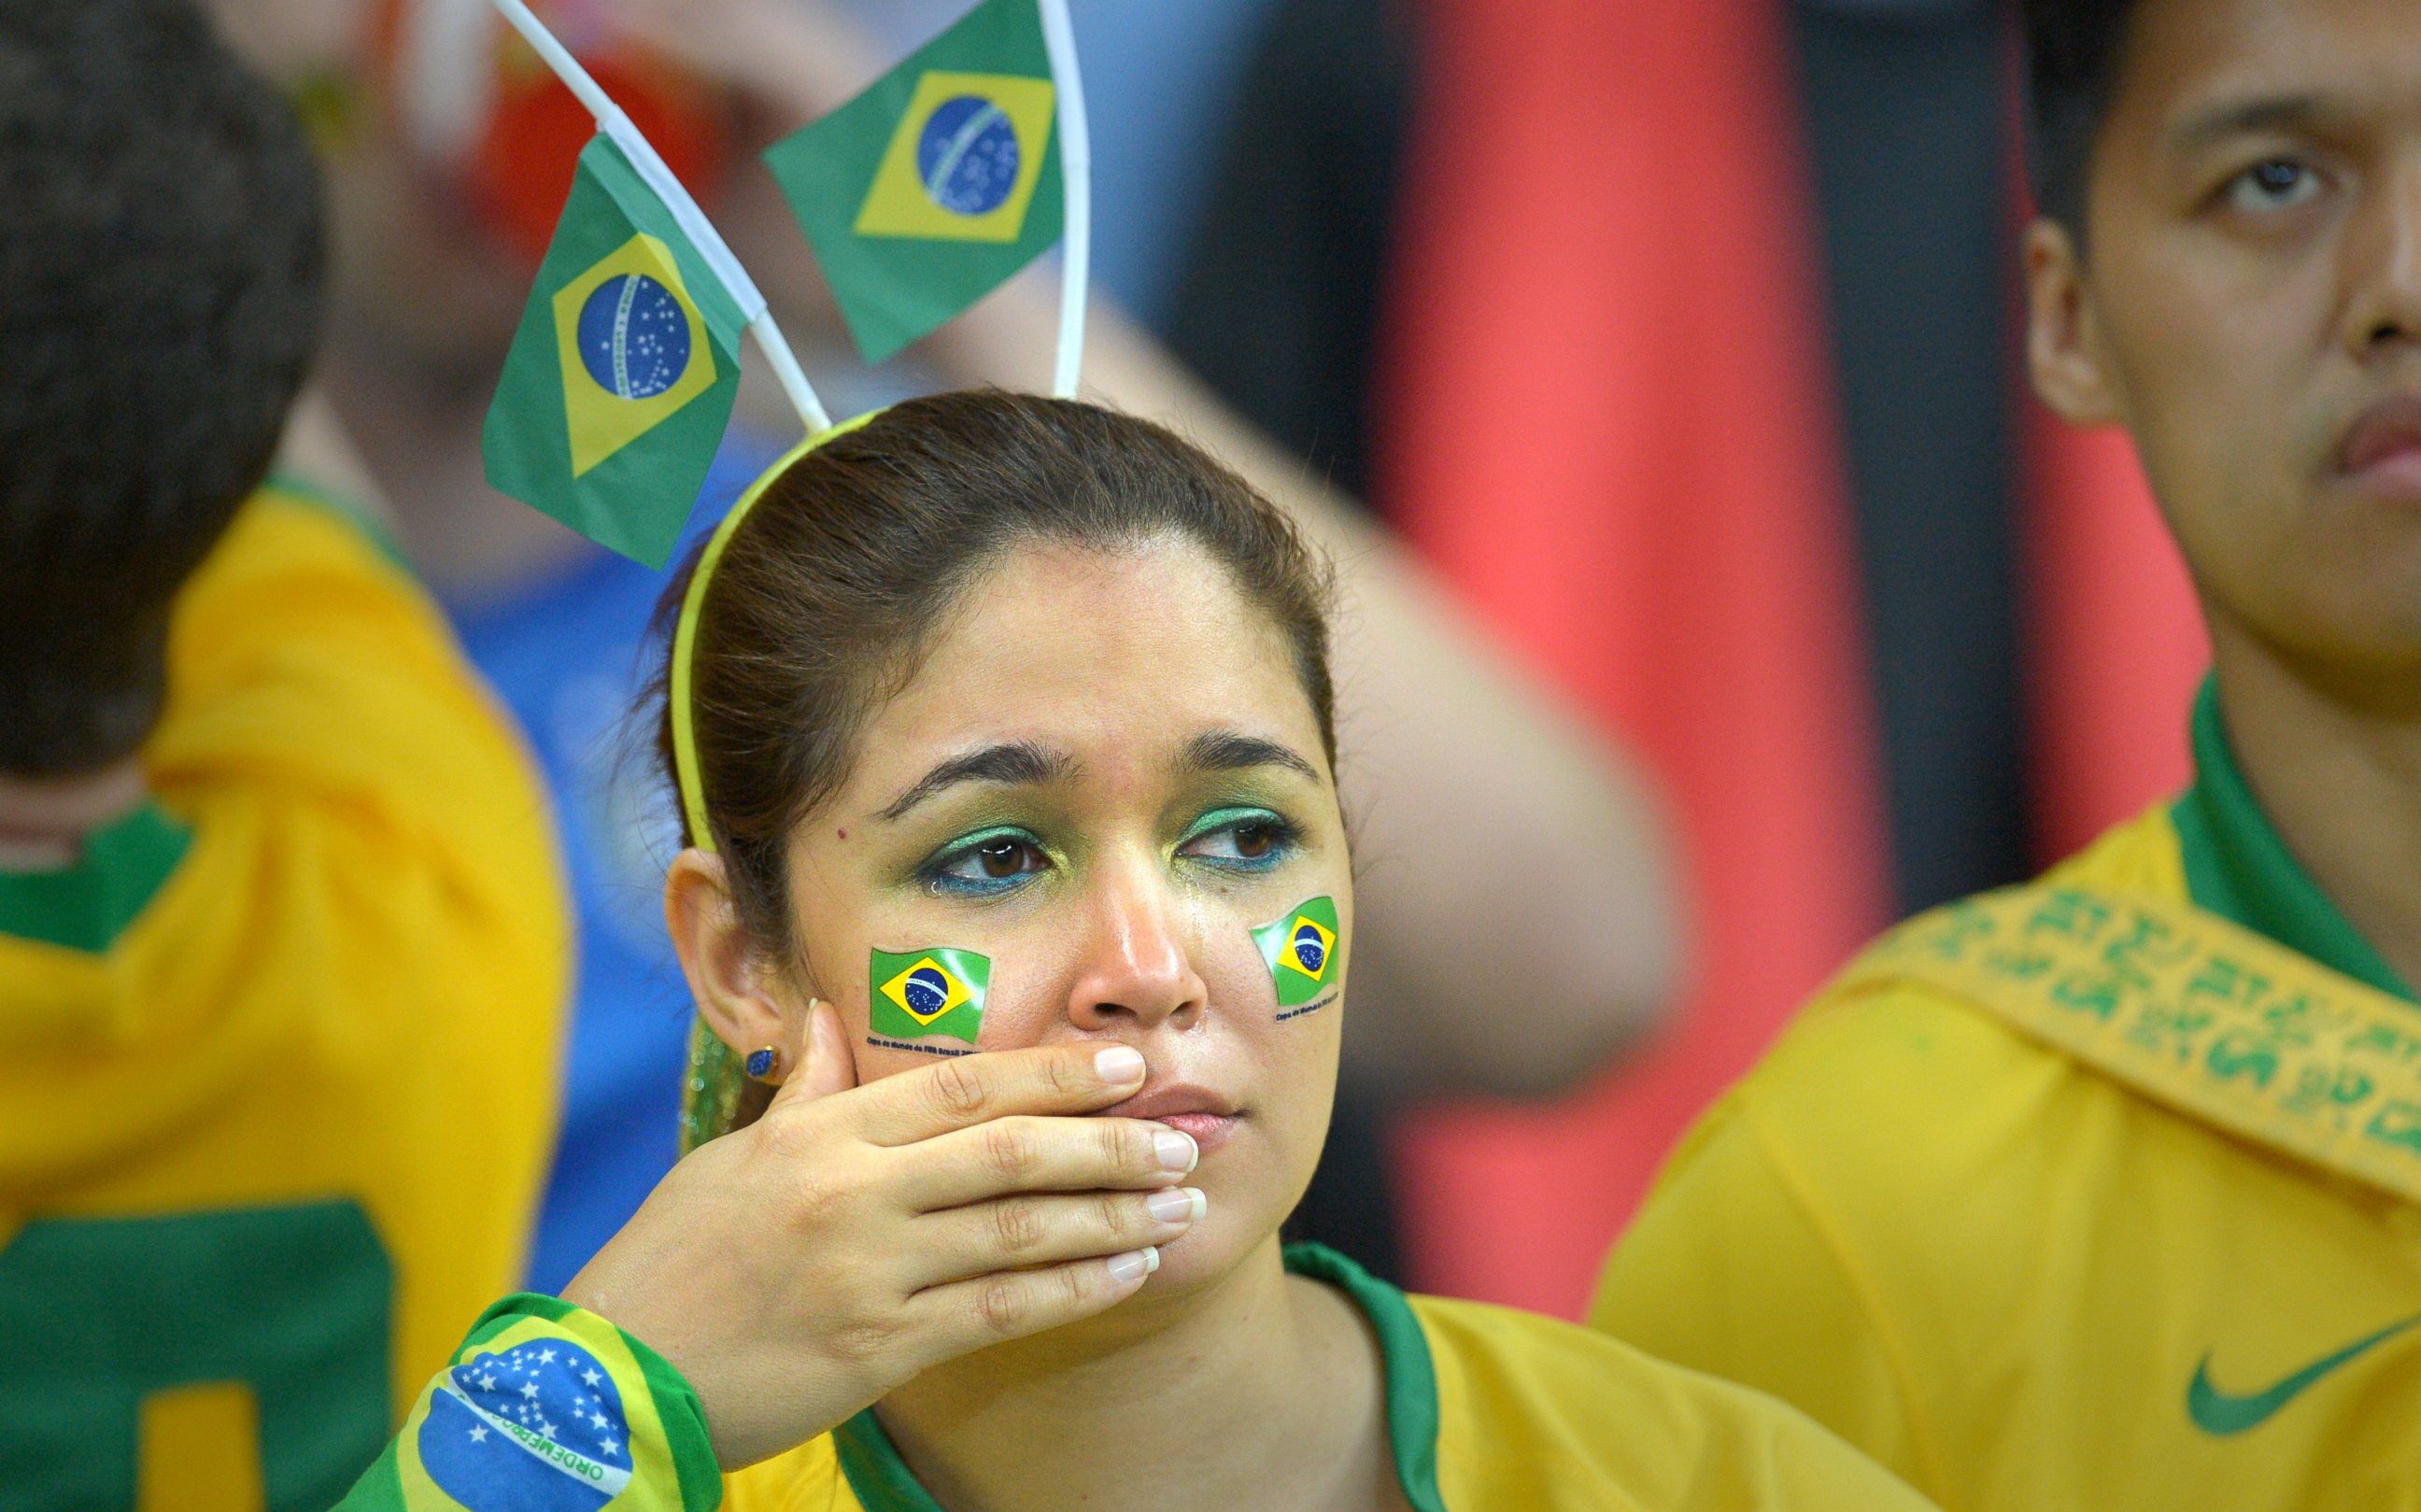 PHOTO: A supporter of Brazil in tears is pictured during the FIFA World Cup 2014 semi-final soccer match between Brazil and Germany at Estadio Mineirao in Belo Horizonte, Brazil on July 8, 2014. 